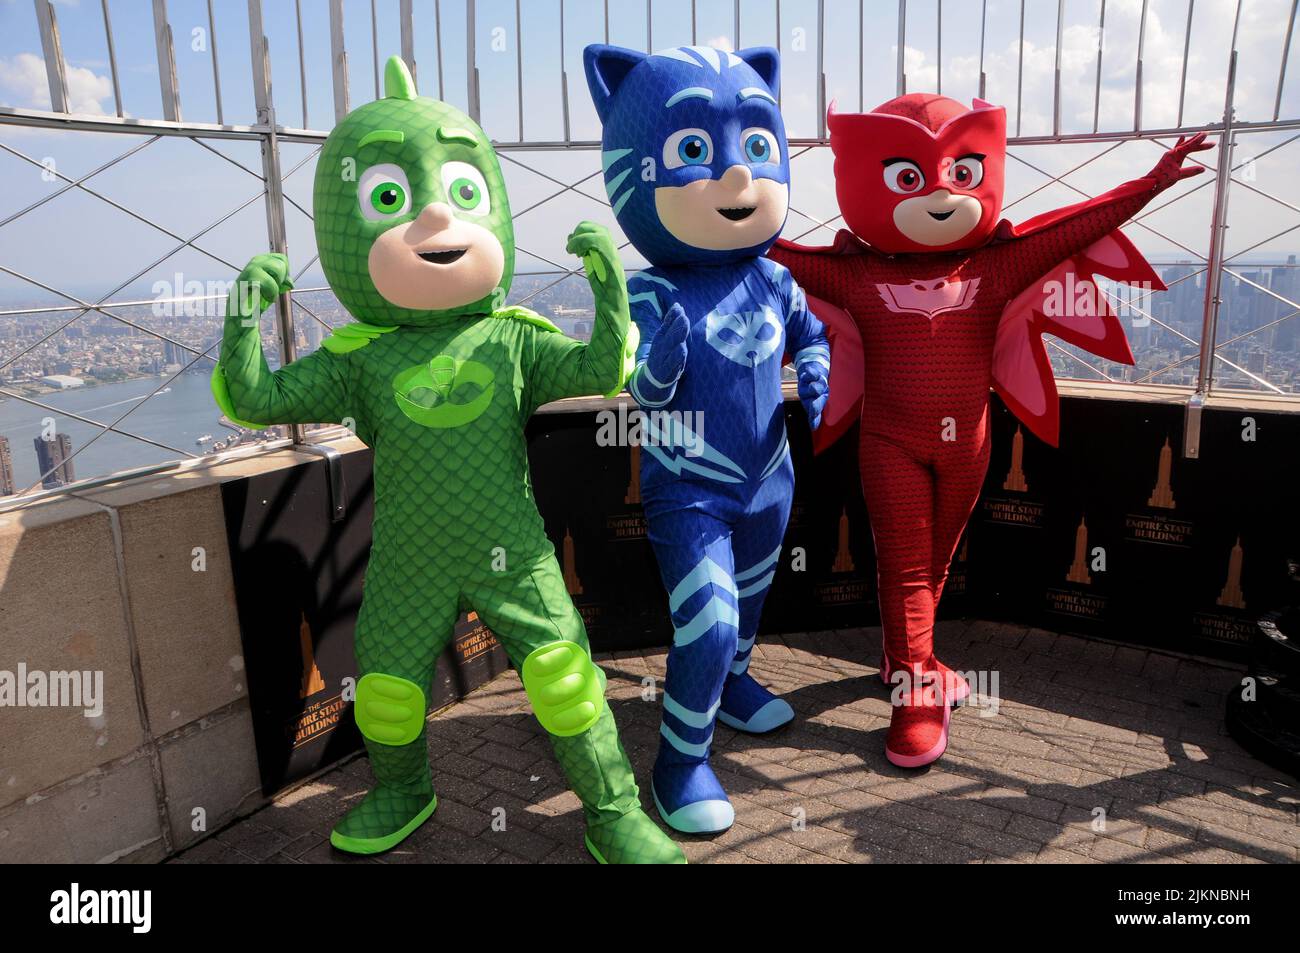 Left to Right) Gekko, Catboy and Owlette, PJ Masks heroes visit the Empire State Building to celebrate new 'Animal Power' episodes Disney Junior, in New York City. (Photo by Efren /